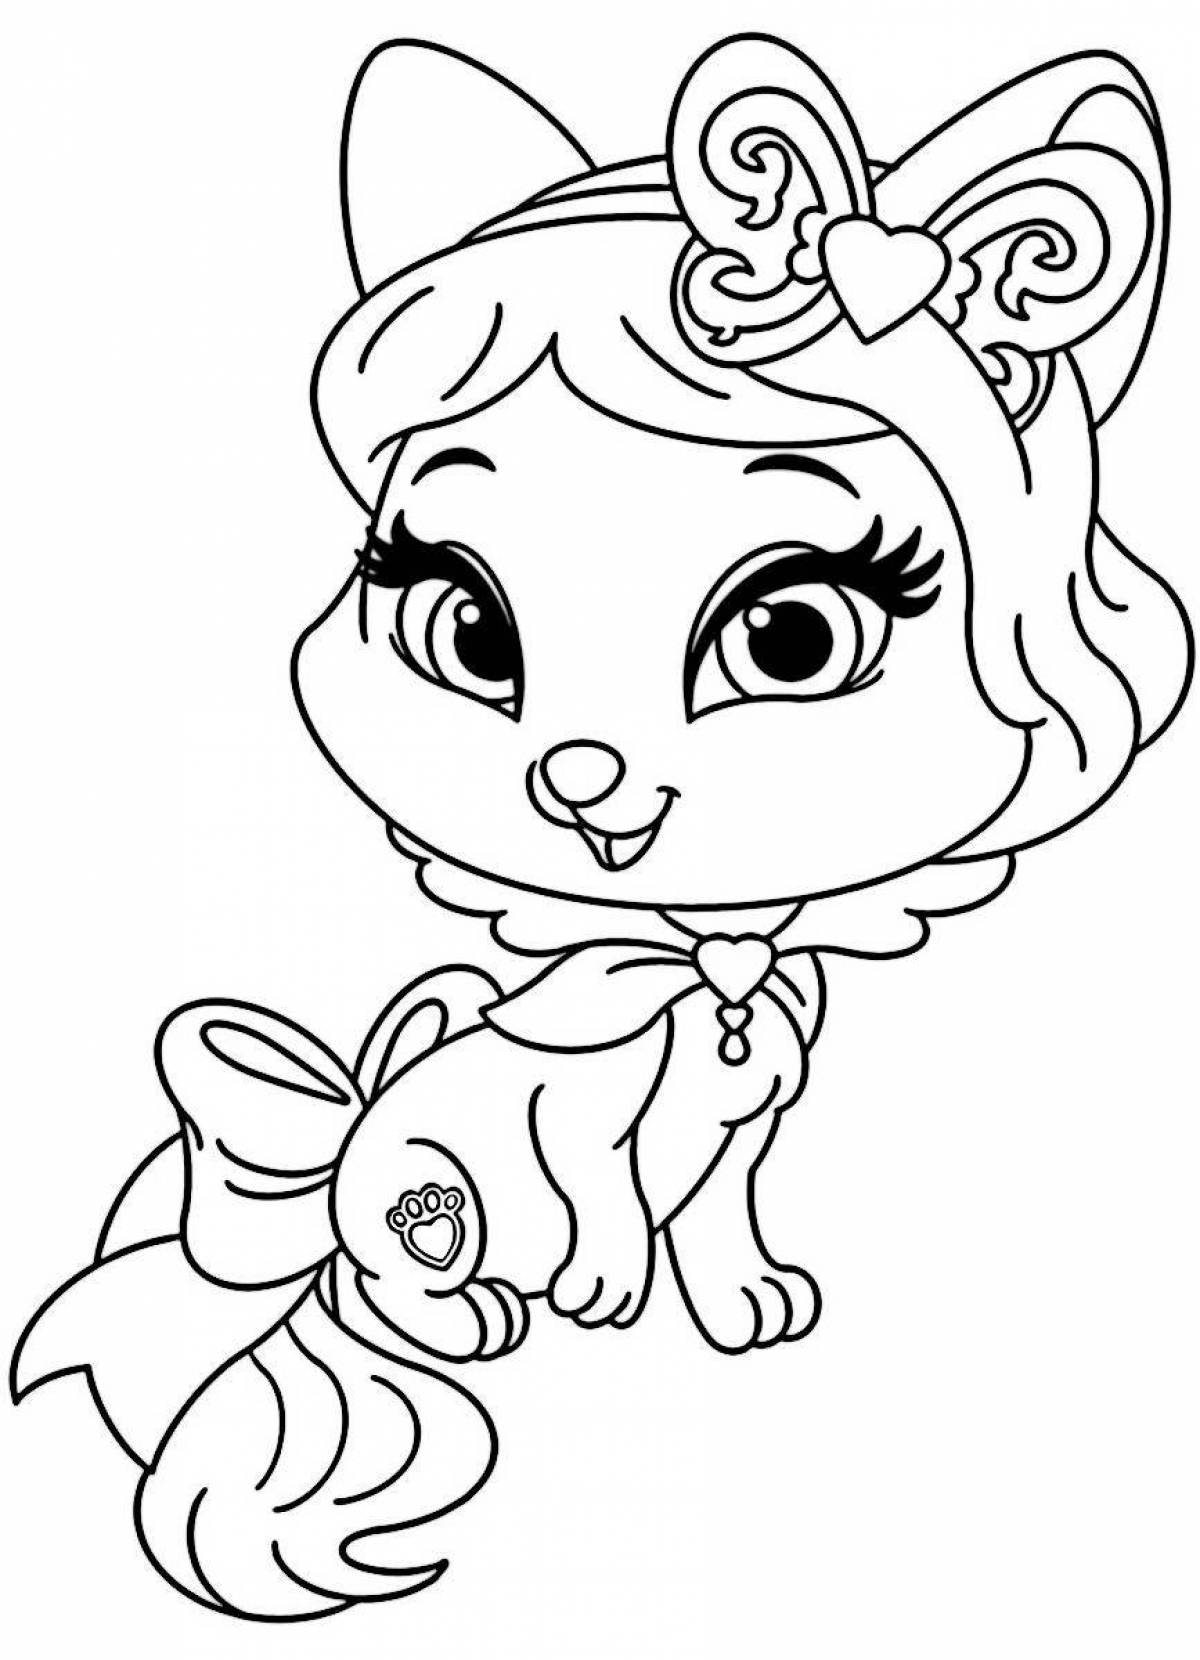 Living lily kitty coloring page